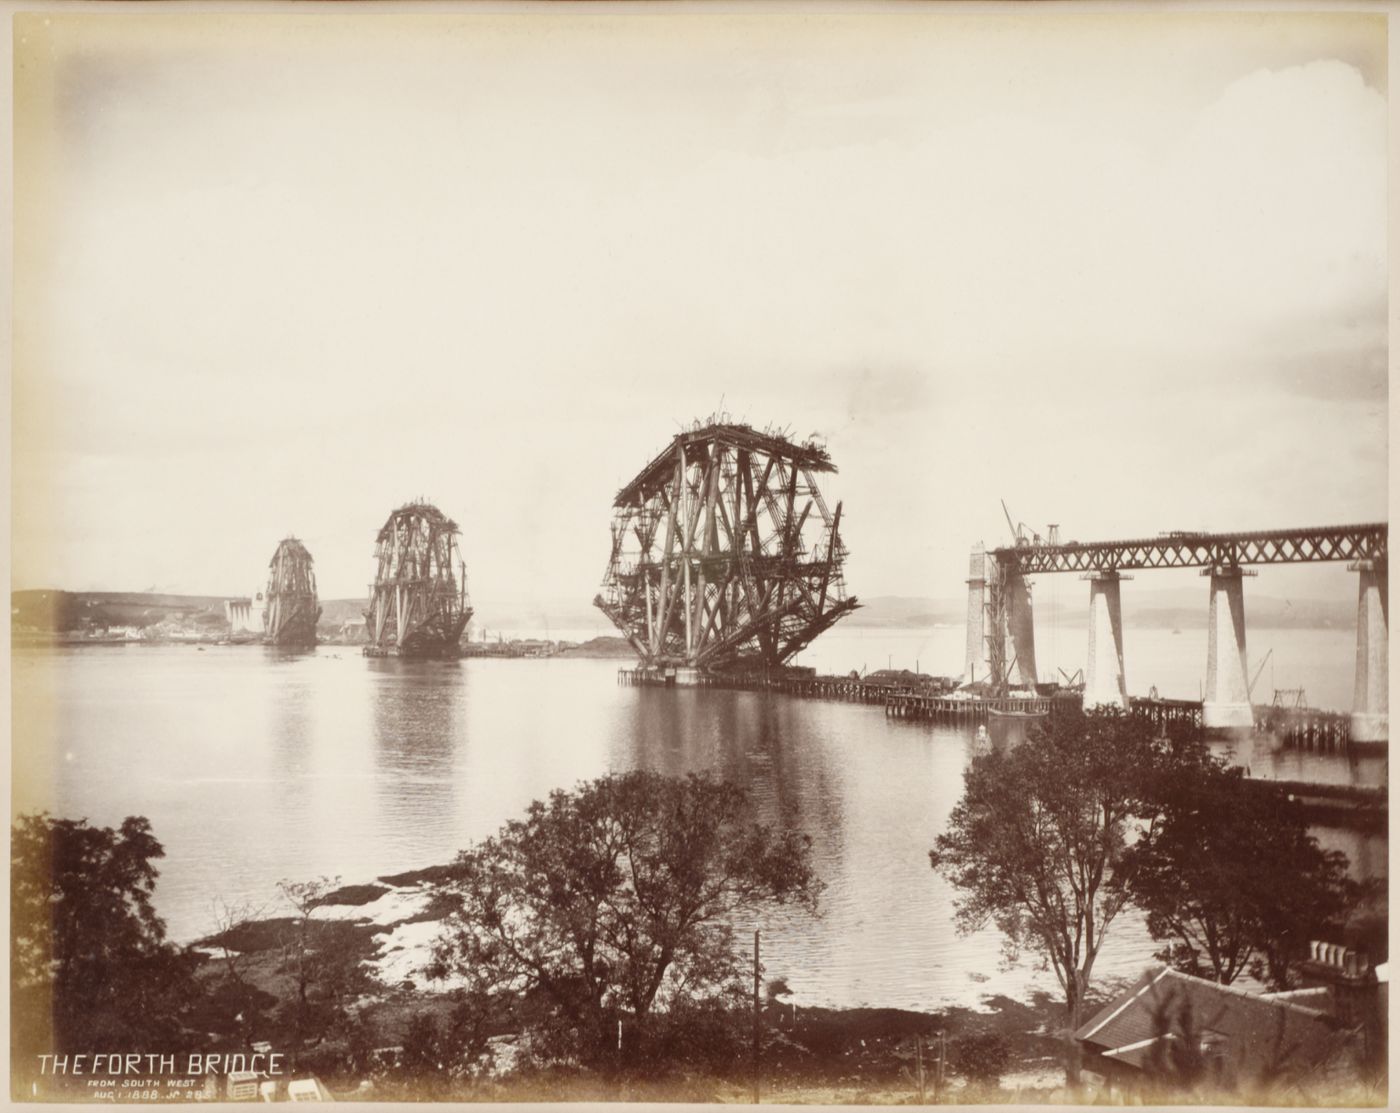 View of the Forth Bridge under construction, Firth of Forth, Scotland, United Kingdom